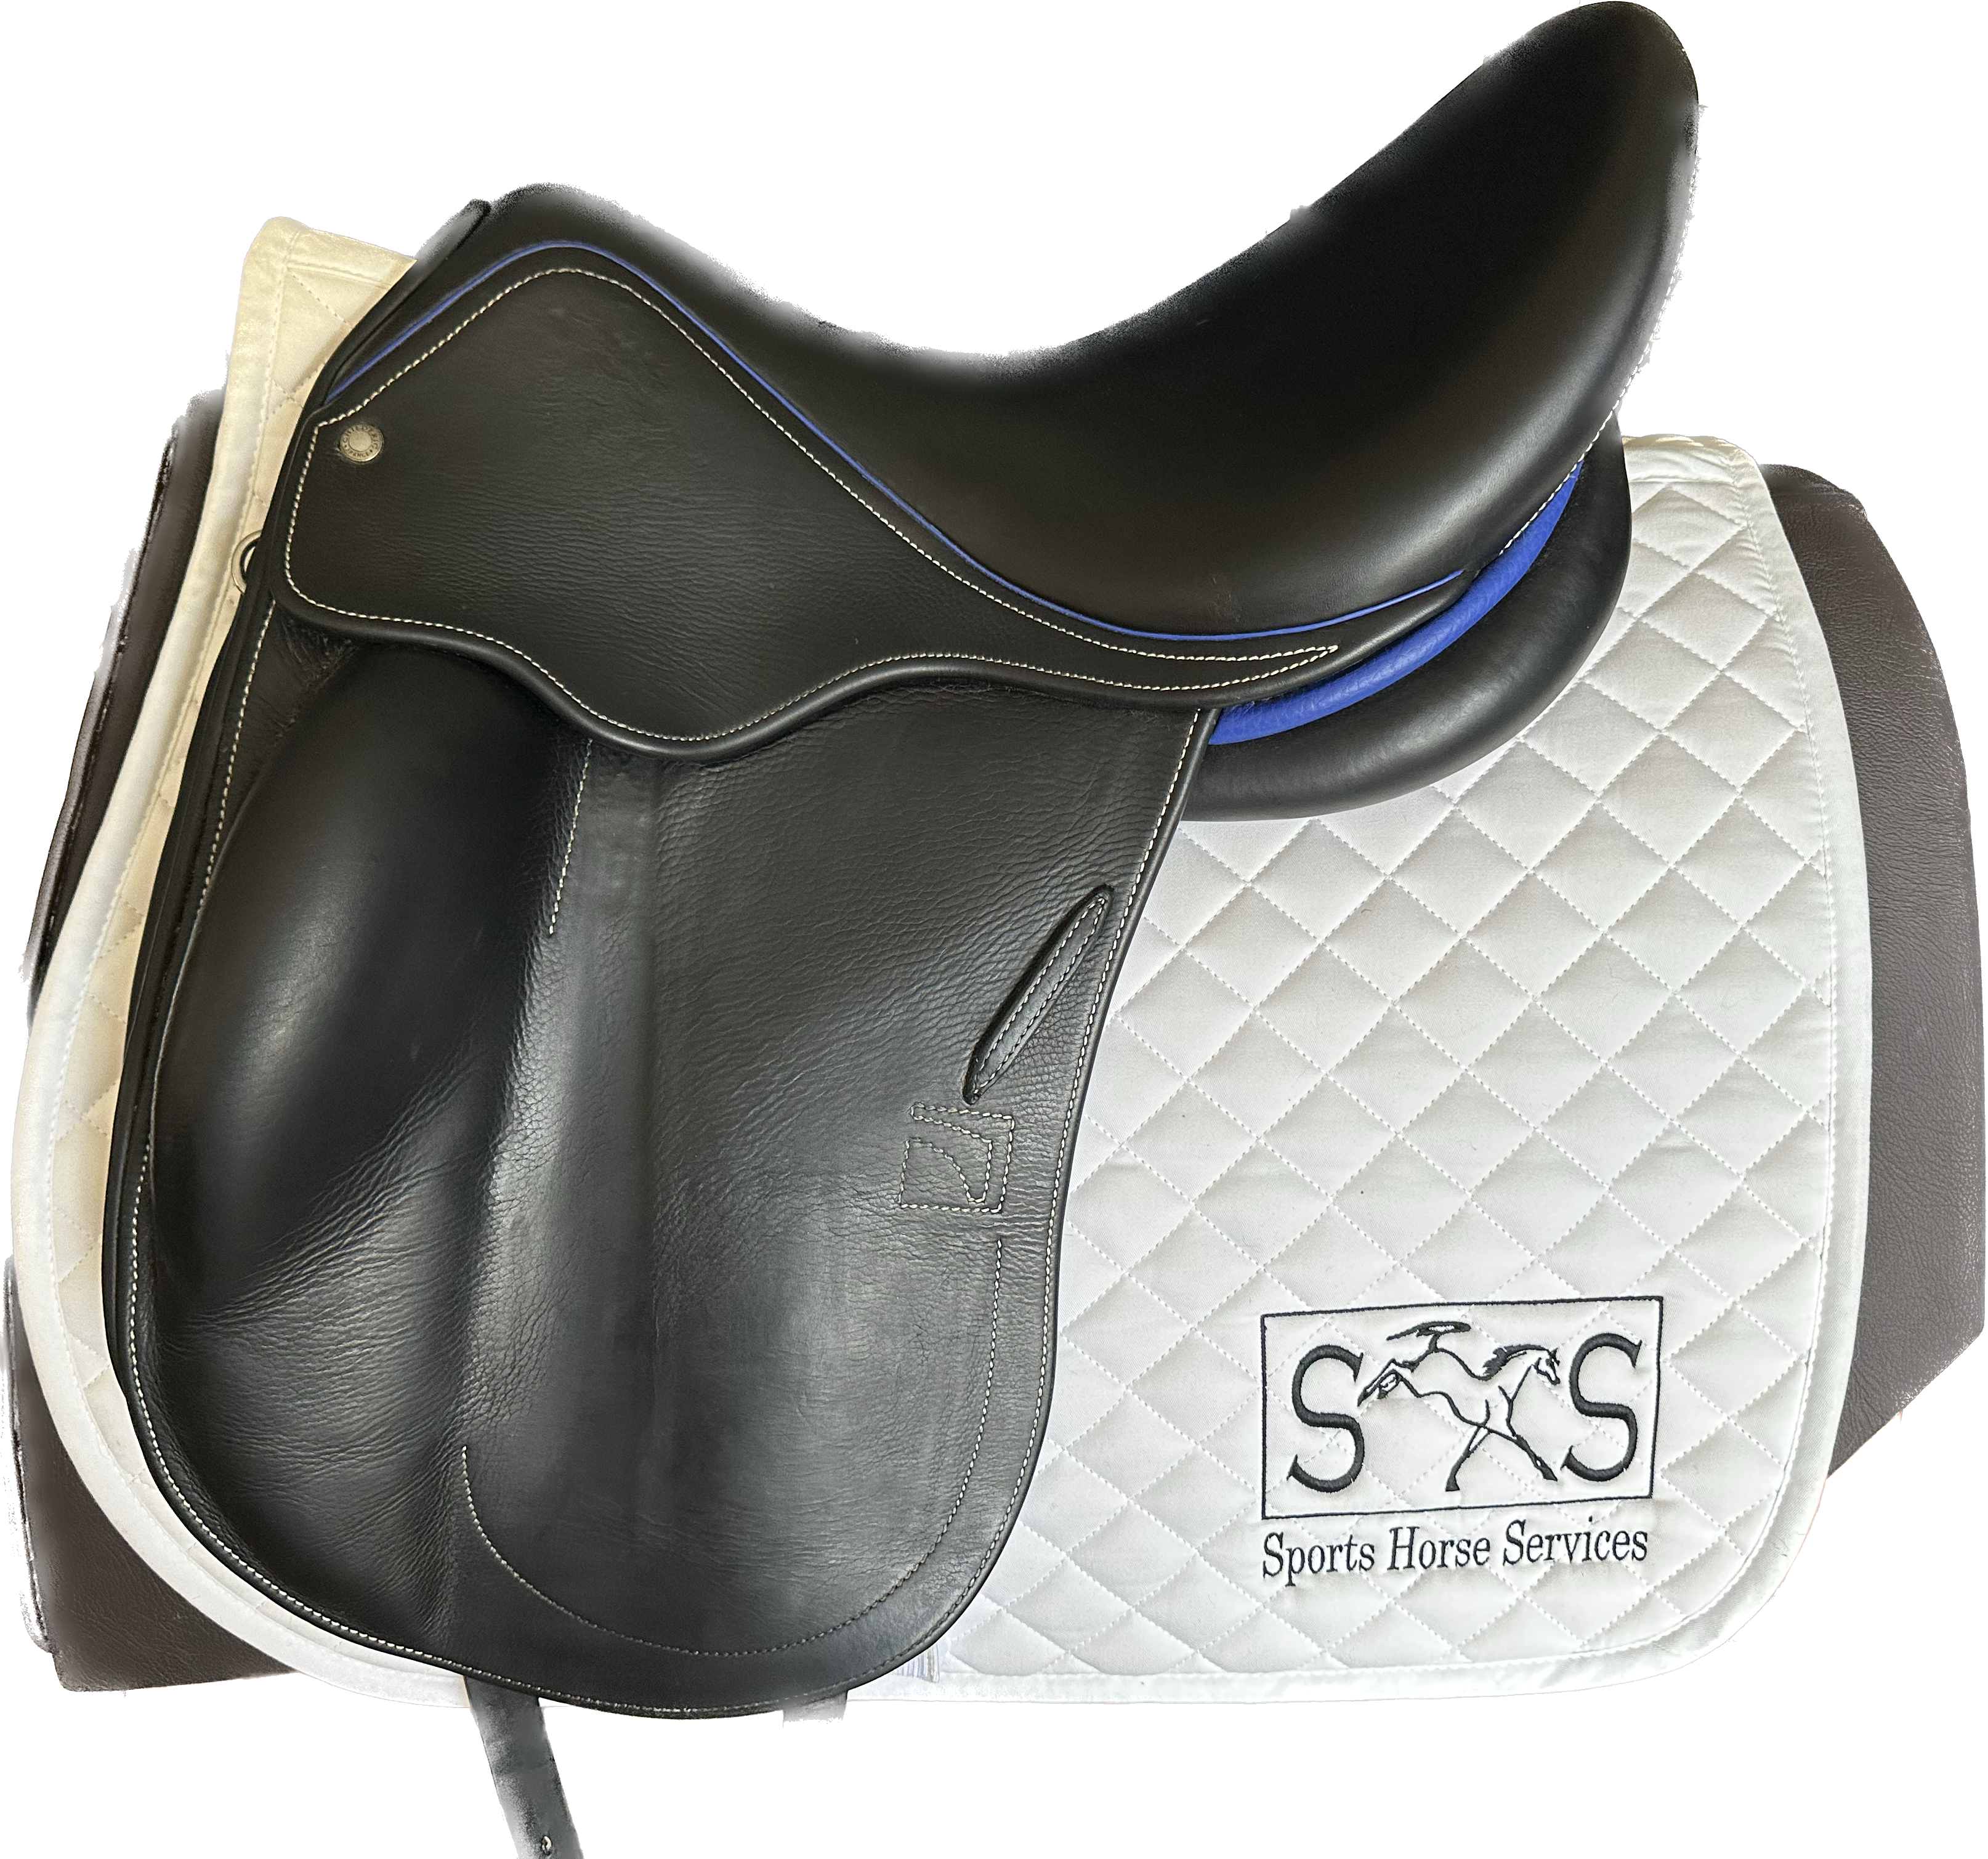 CHILDÉRIC DNL Monoflap Dressage Saddle 17” MW  Immaculate Condition. Barely used